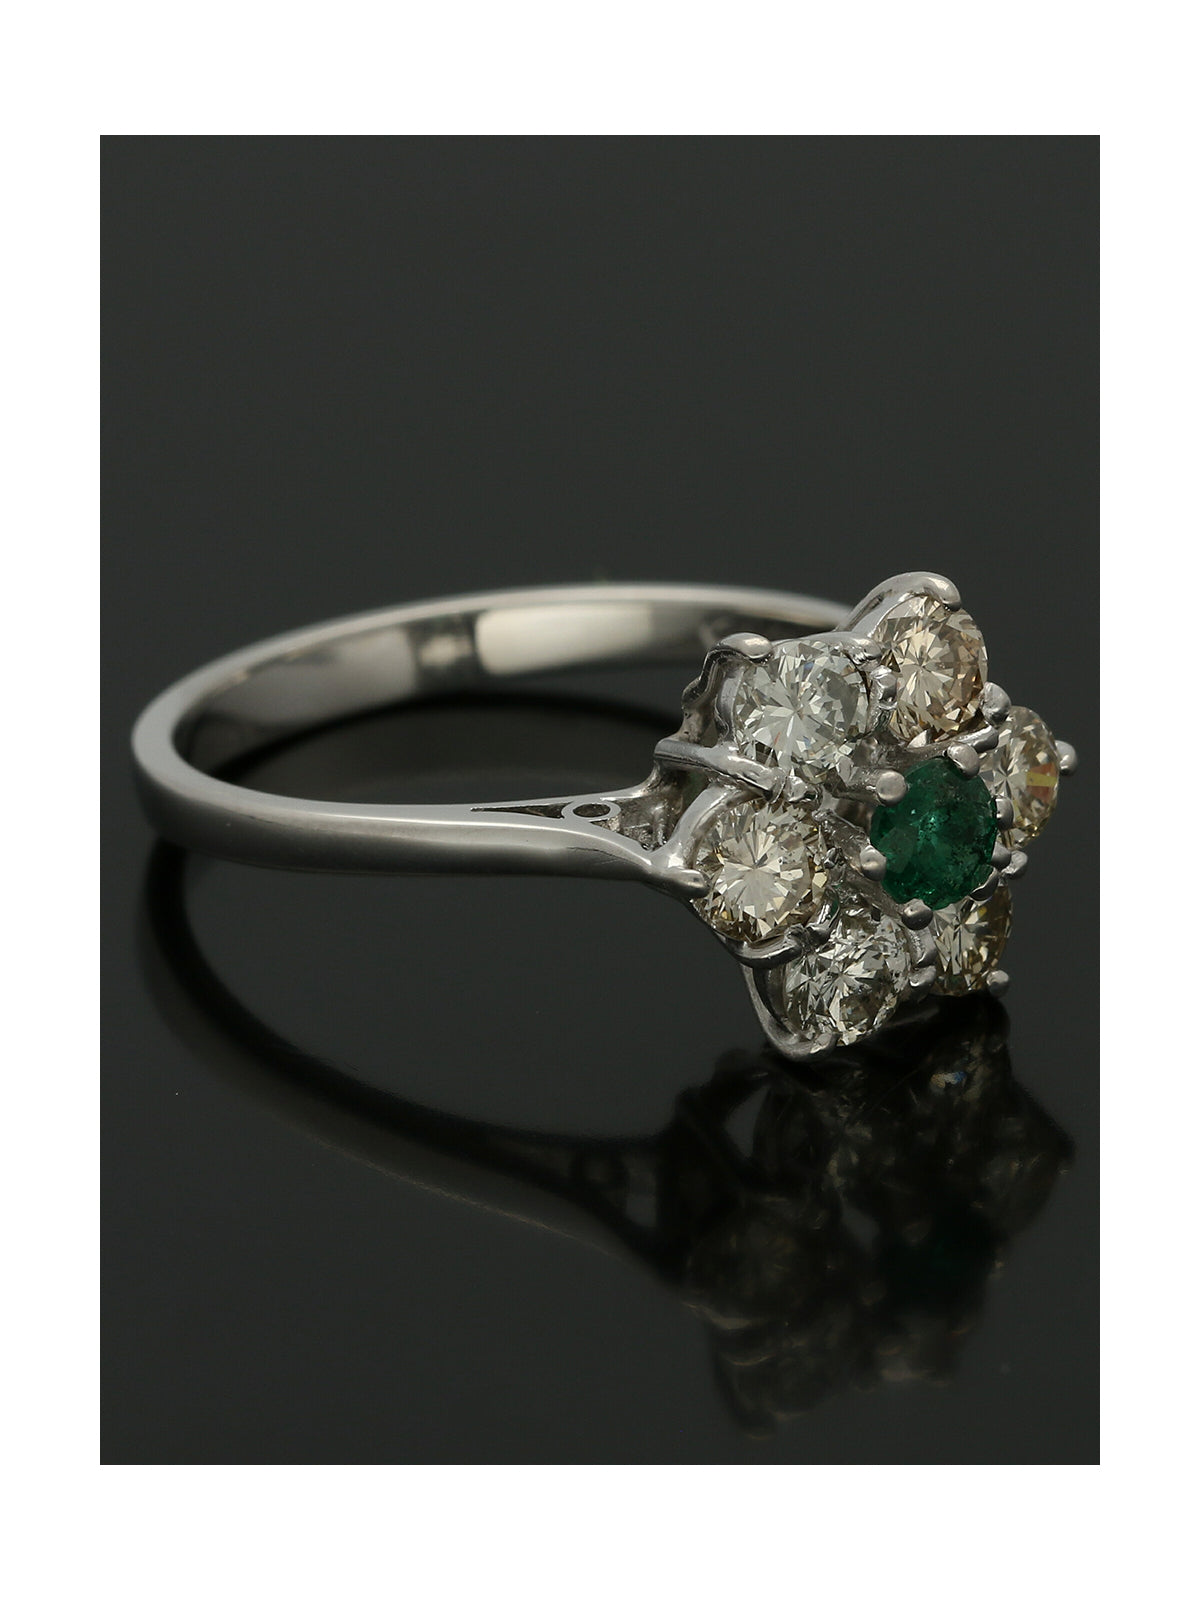 Pre Owned Emerald & Diamond Cluster Ring in 18ct White Gold